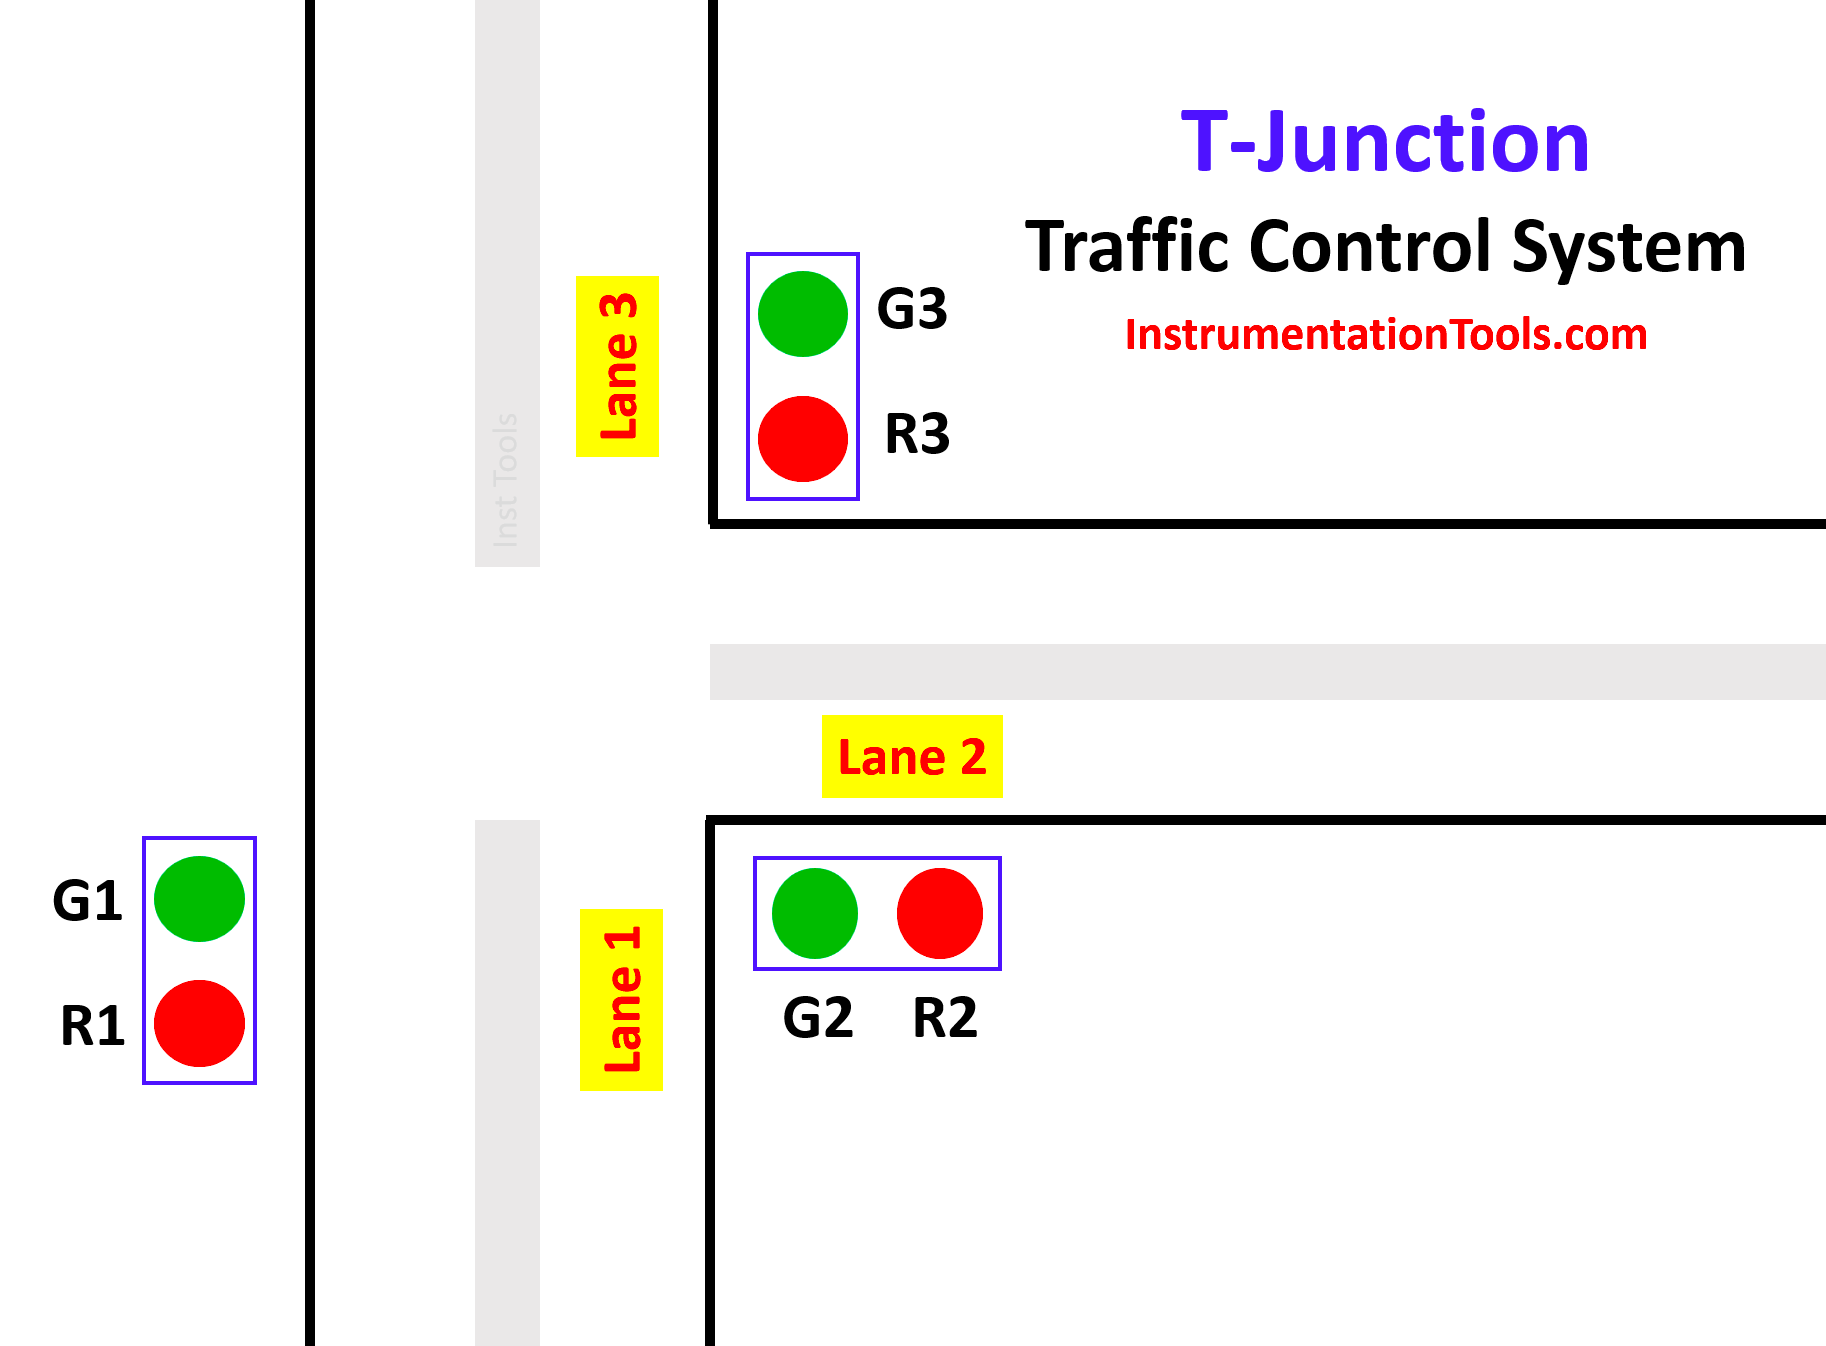 T-Junction Traffic Control System